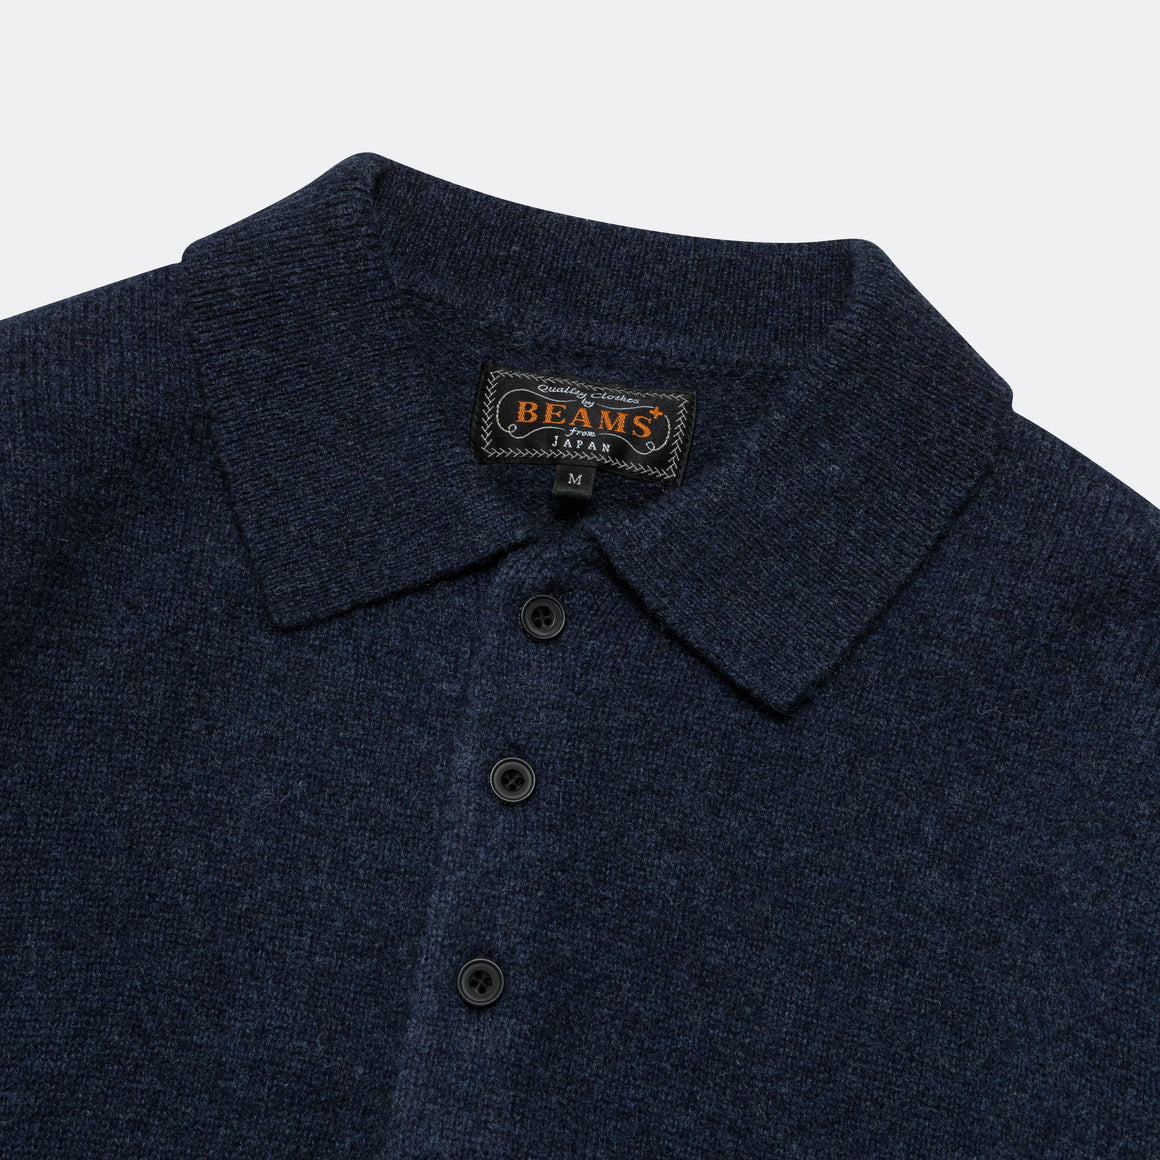 Beams Plus - 9G Knit Polo - Navy - UP THERE